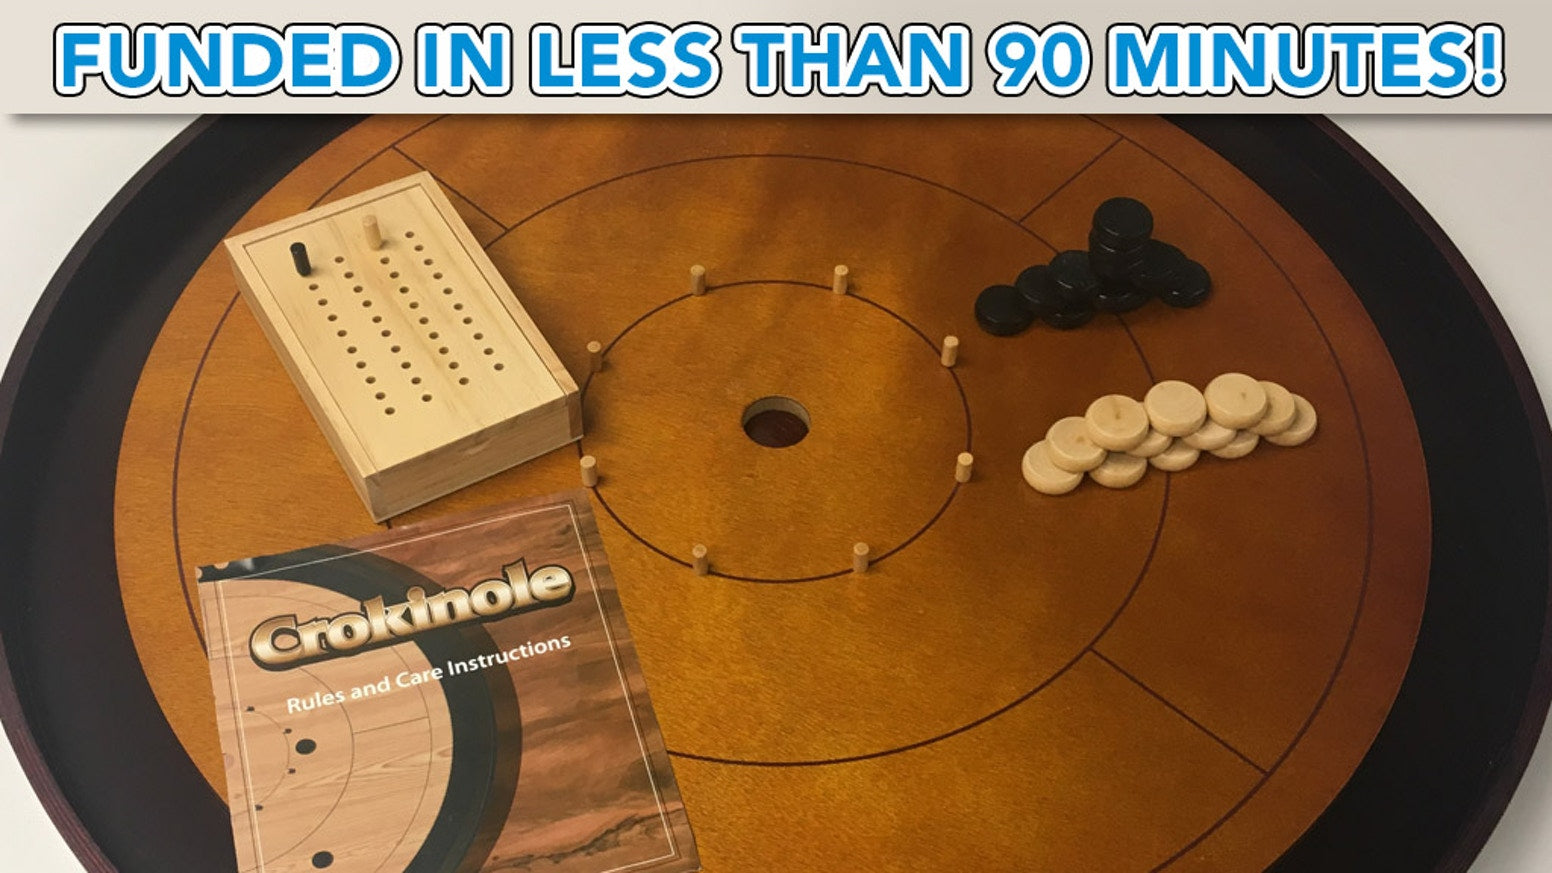 CROKINOLE: Join 1,000+ Backers Who Have Pledged Over $121K!!! [Our New Kickstarter]